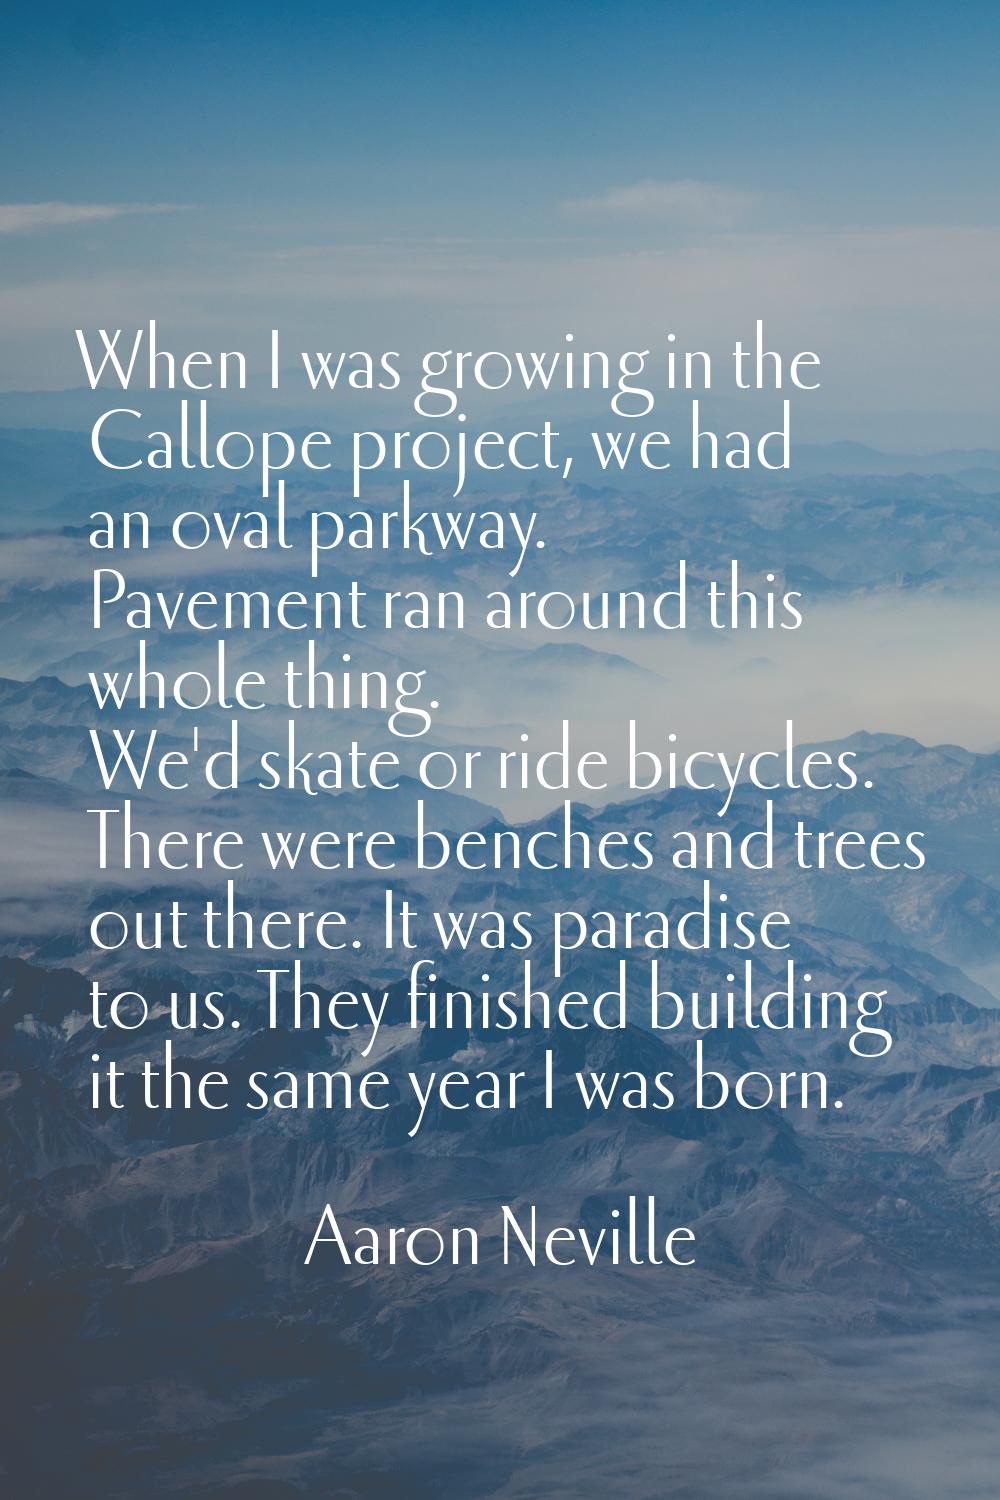 When I was growing in the Callope project, we had an oval parkway. Pavement ran around this whole t